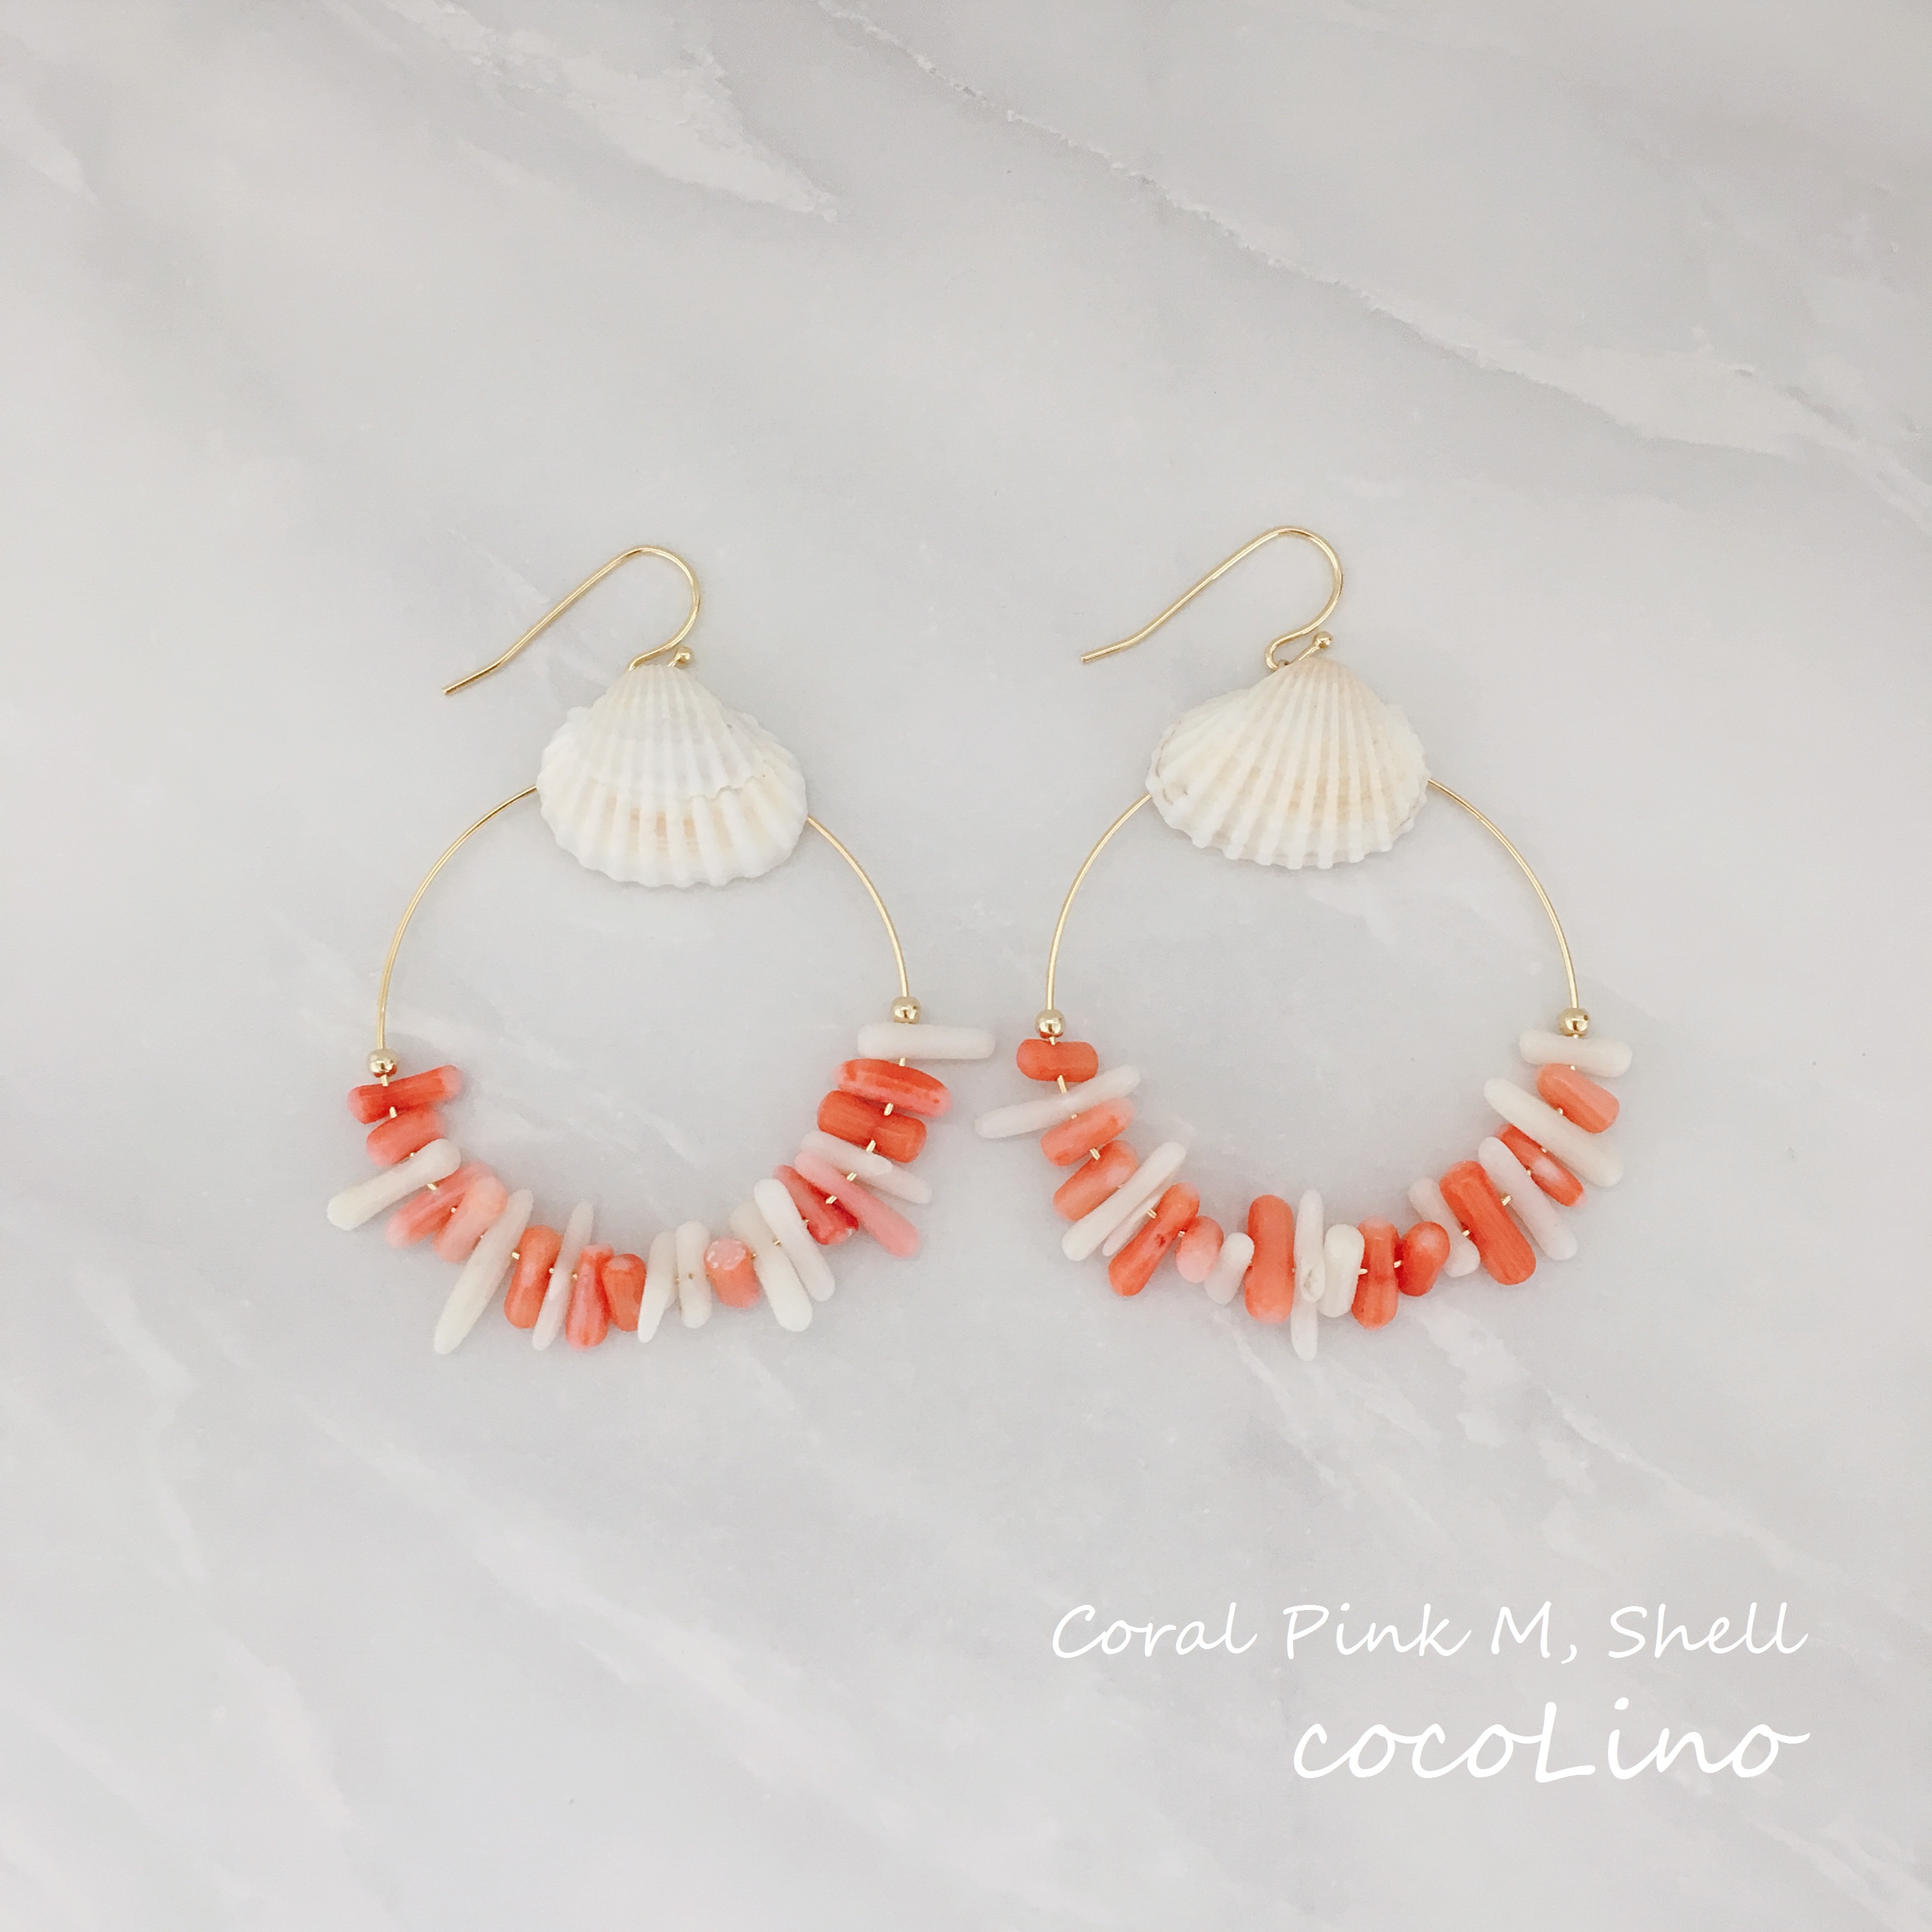 Coral Pink M, Shell